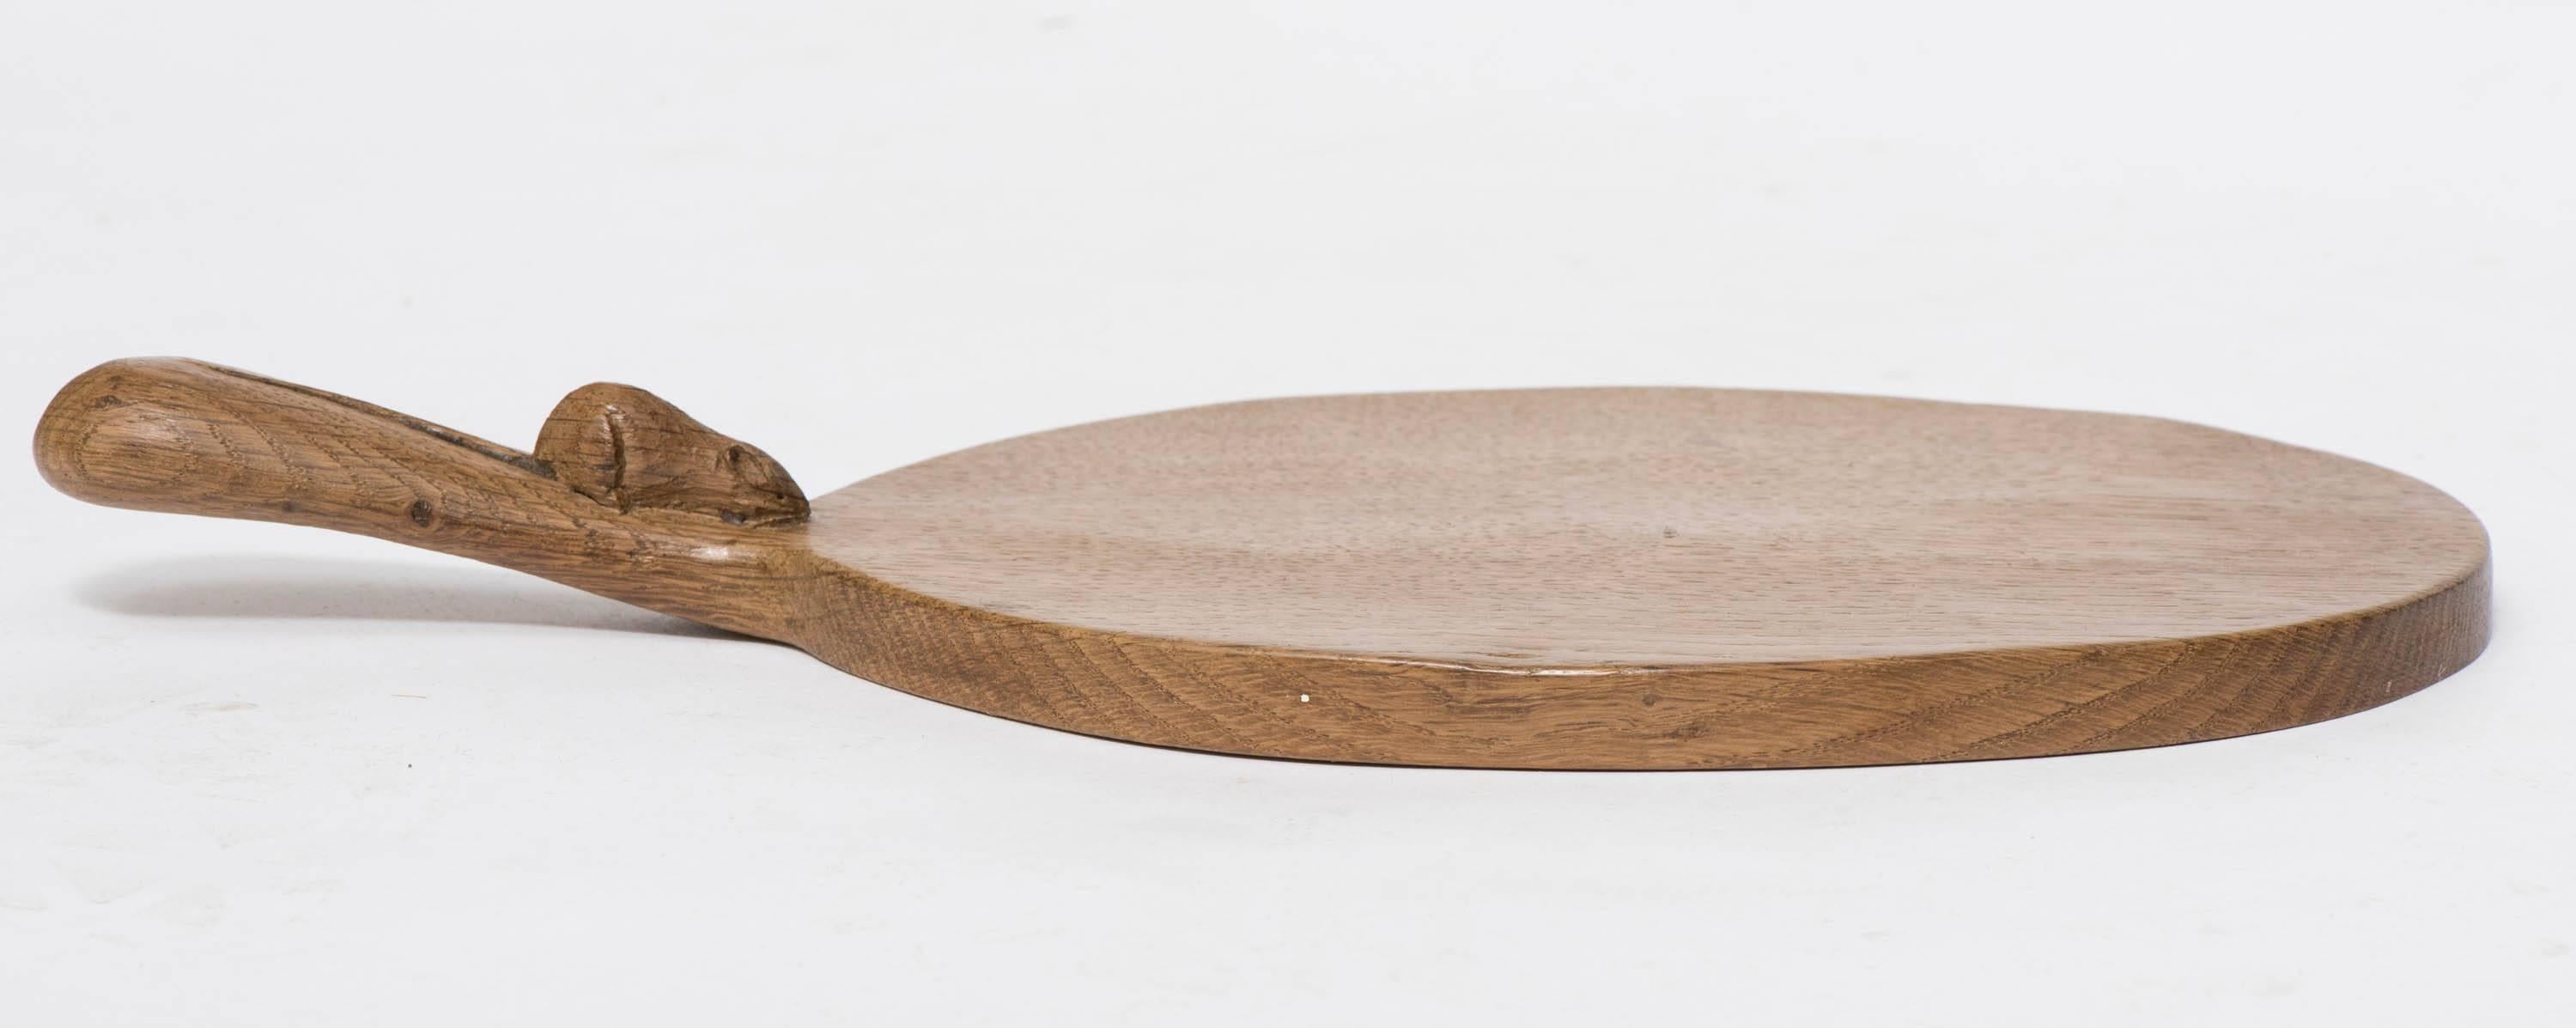 An oak cheese board by Robert Thompson “Mouseman”
Carved mouse to the board
adzed
English
circa 1960
Measures: 37 cms W 17.5 cm x 2 cm.
 